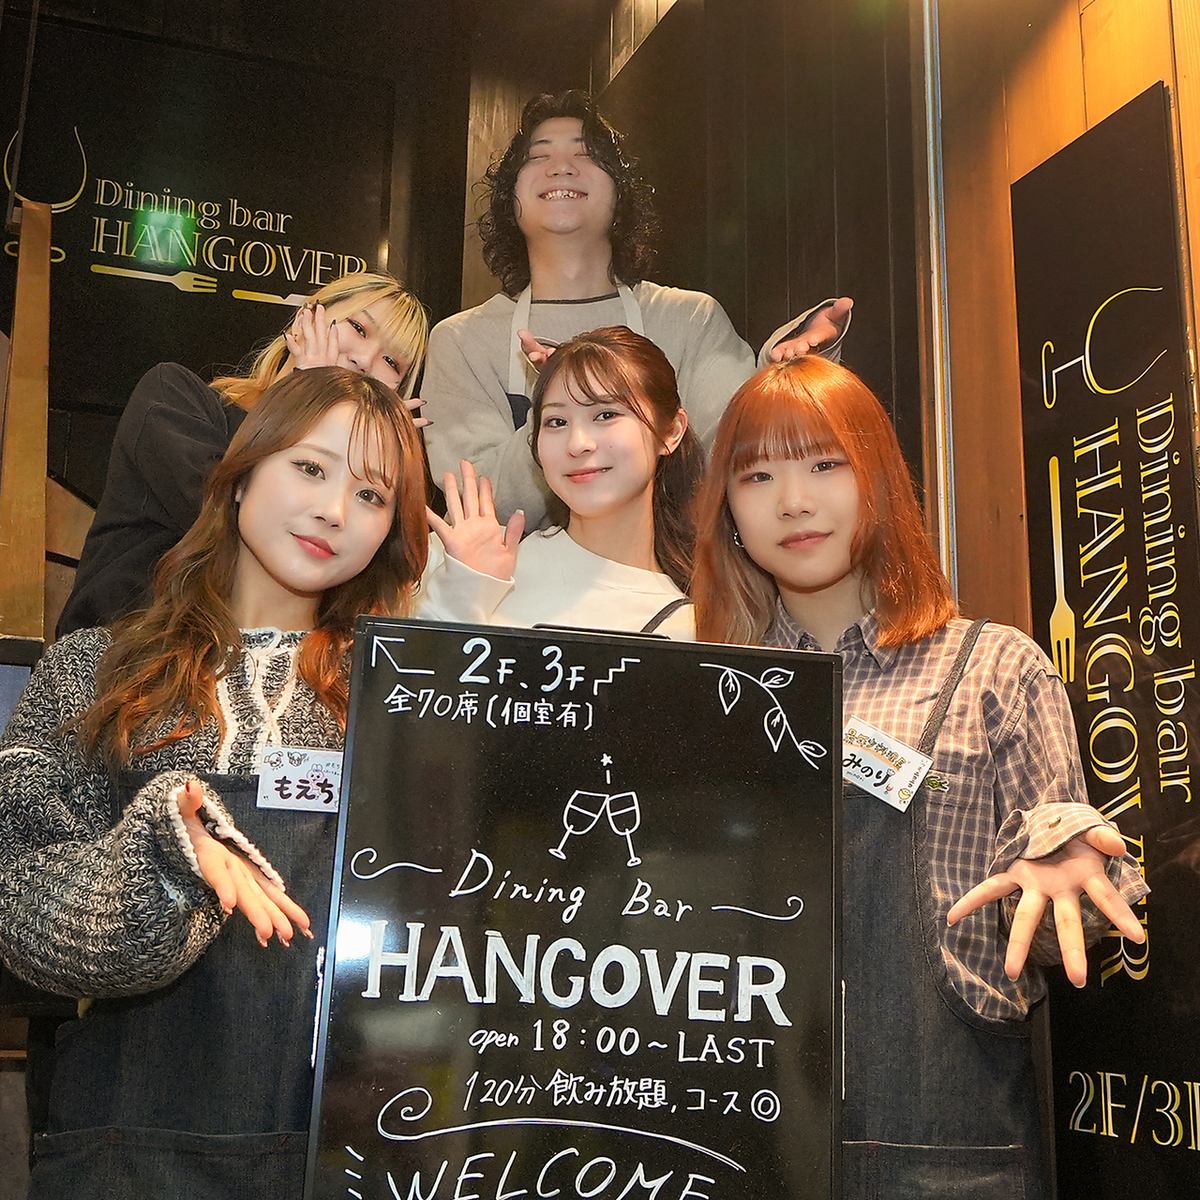 Recommended for a girls' night out or drinking party at a stylish Italian restaurant♪